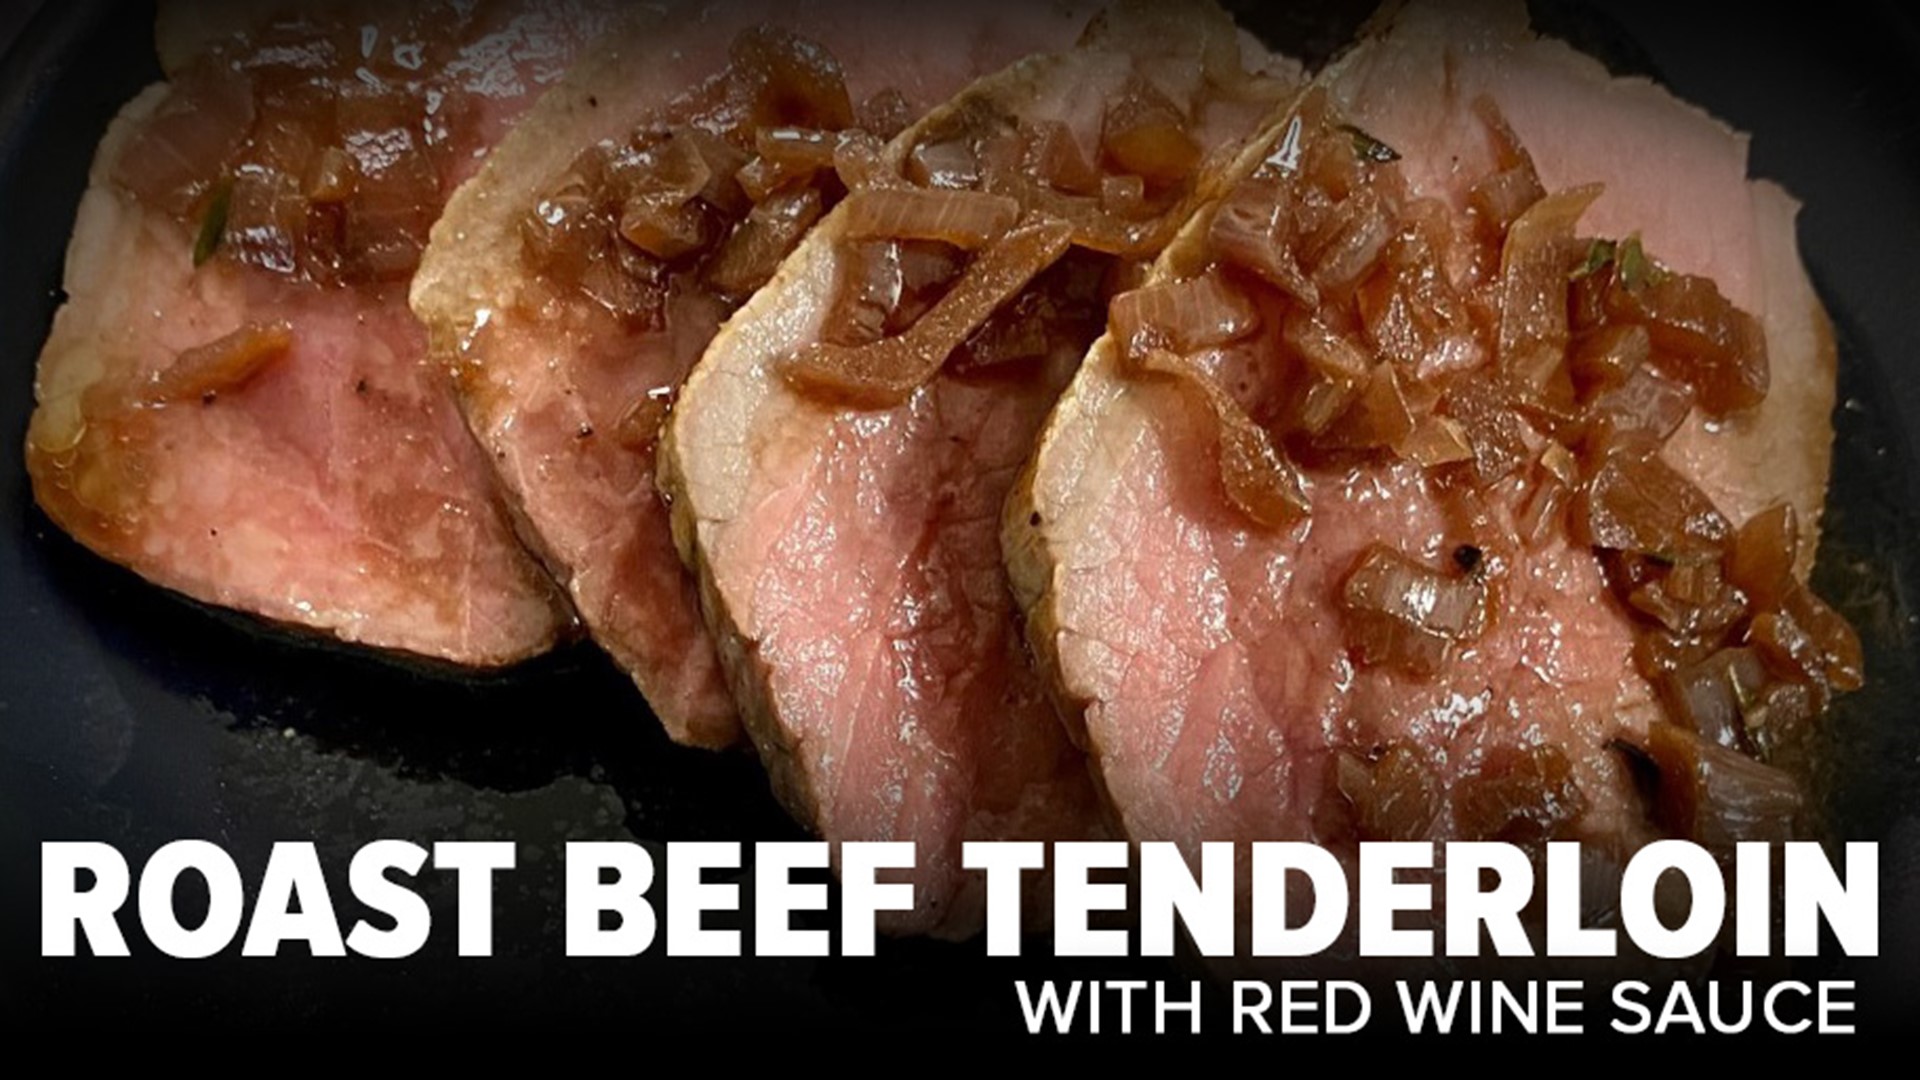 This one is for all you meat lovers who like a glass of wine with dinner.